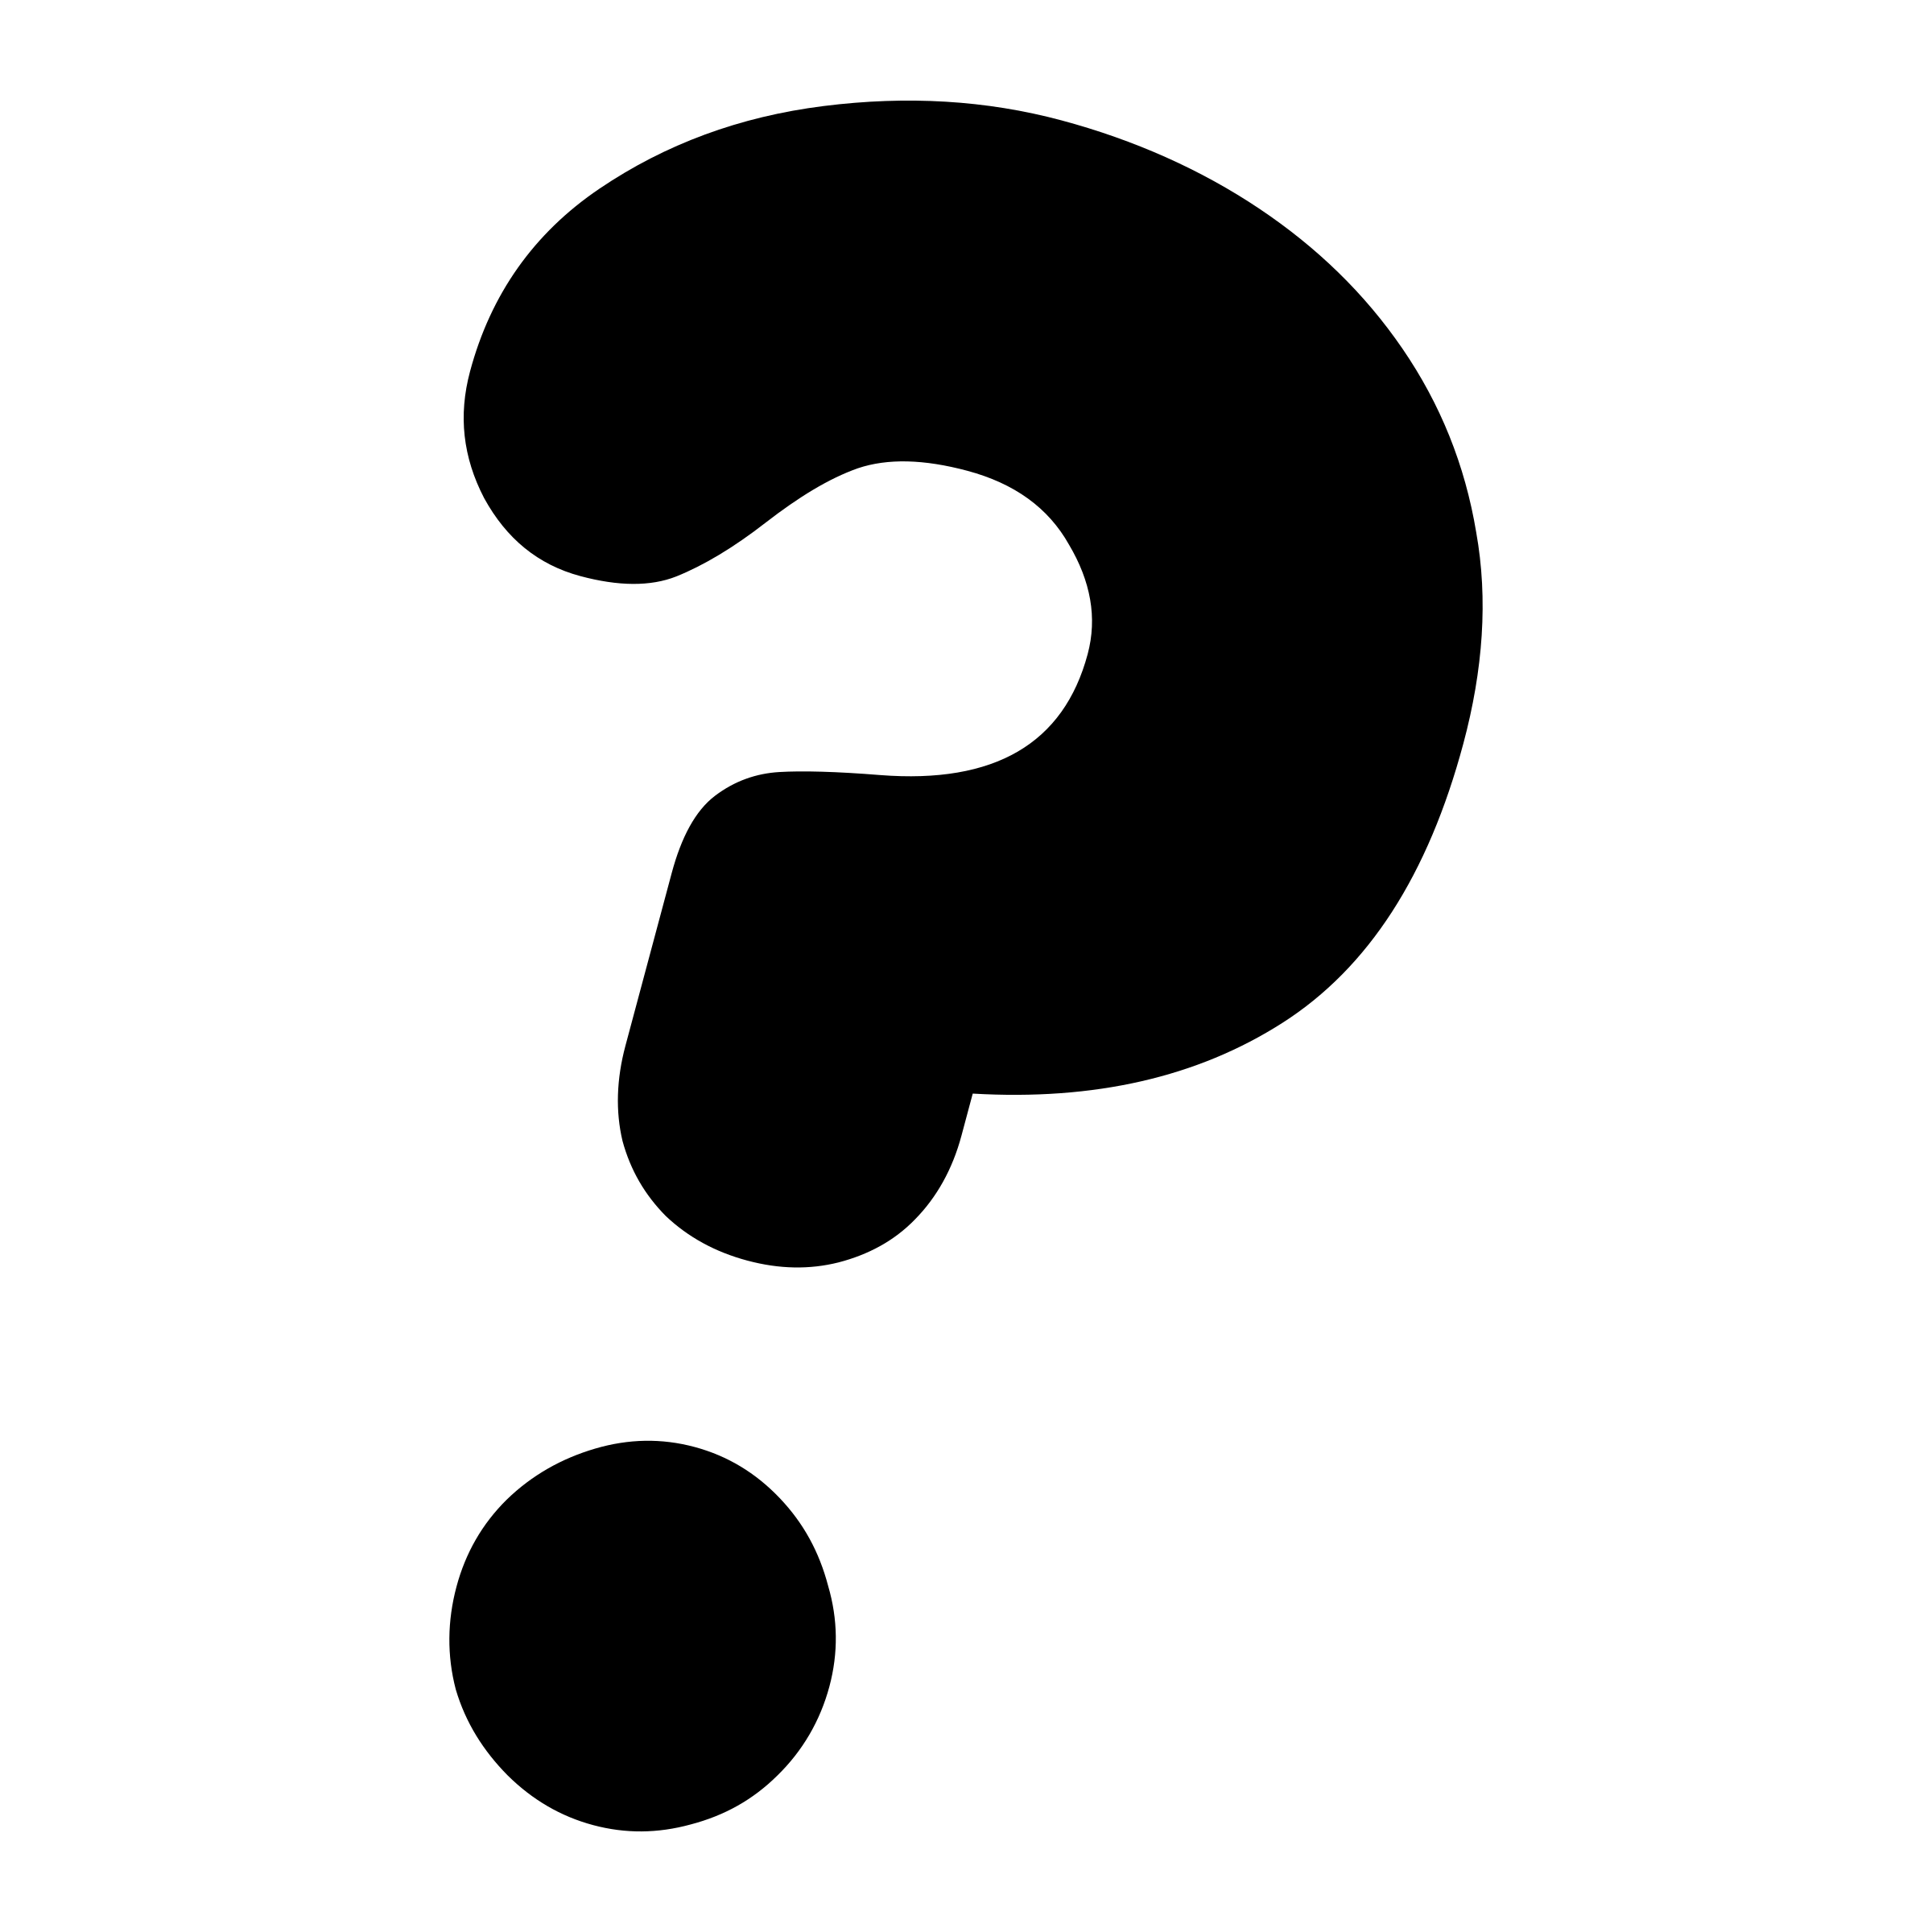 question sign clipart - photo #33